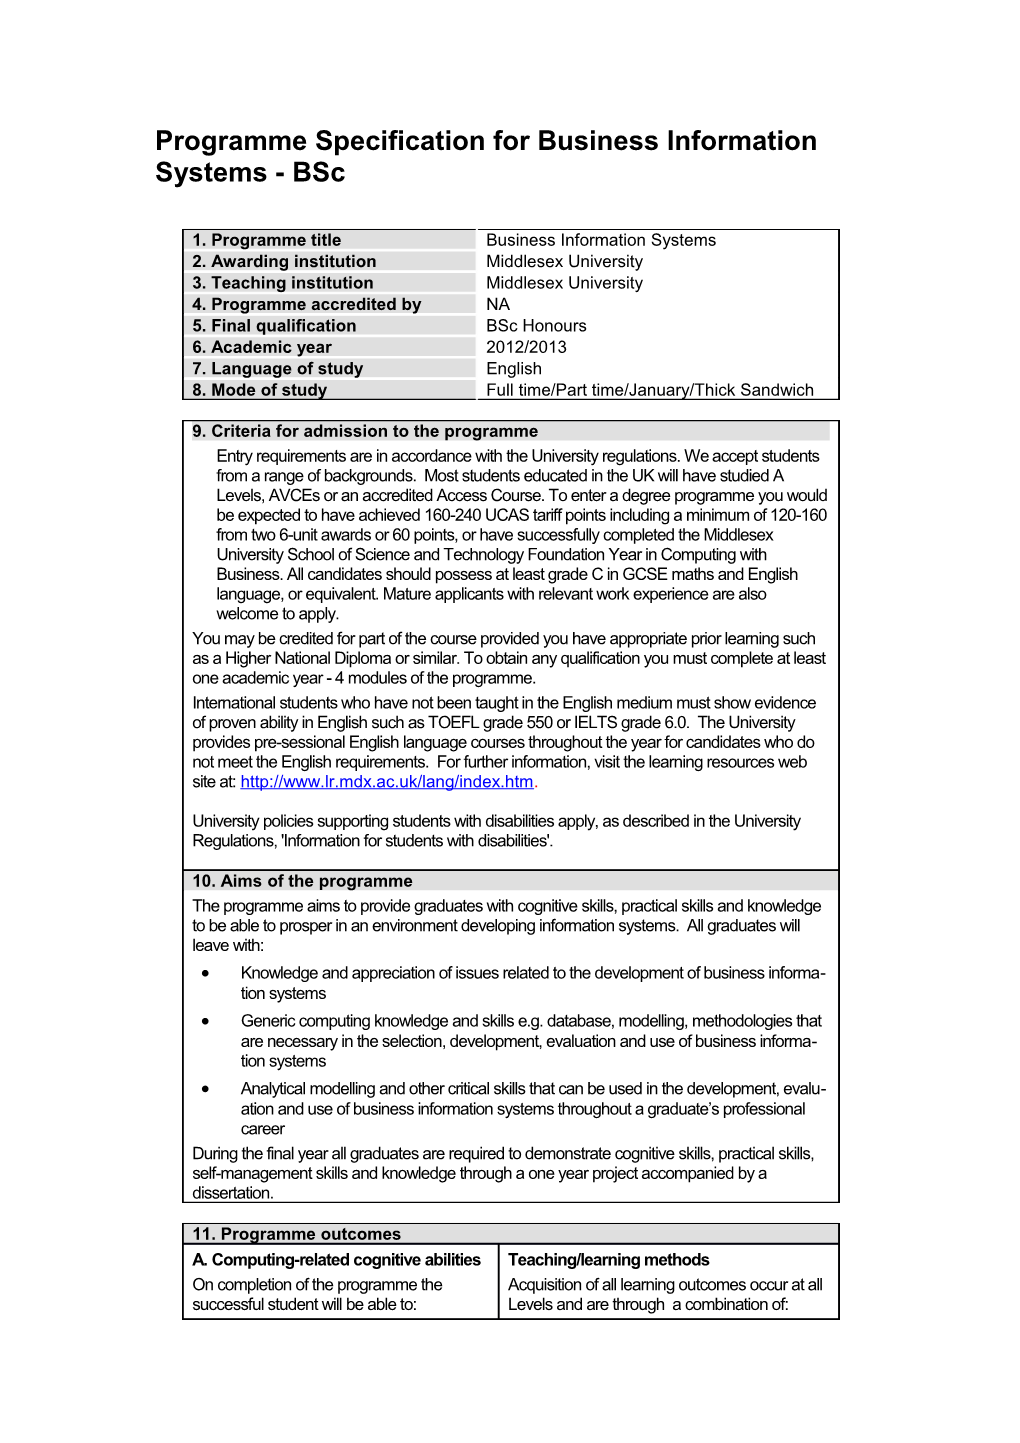 Programme Specification for Business Information Systems - Bsc